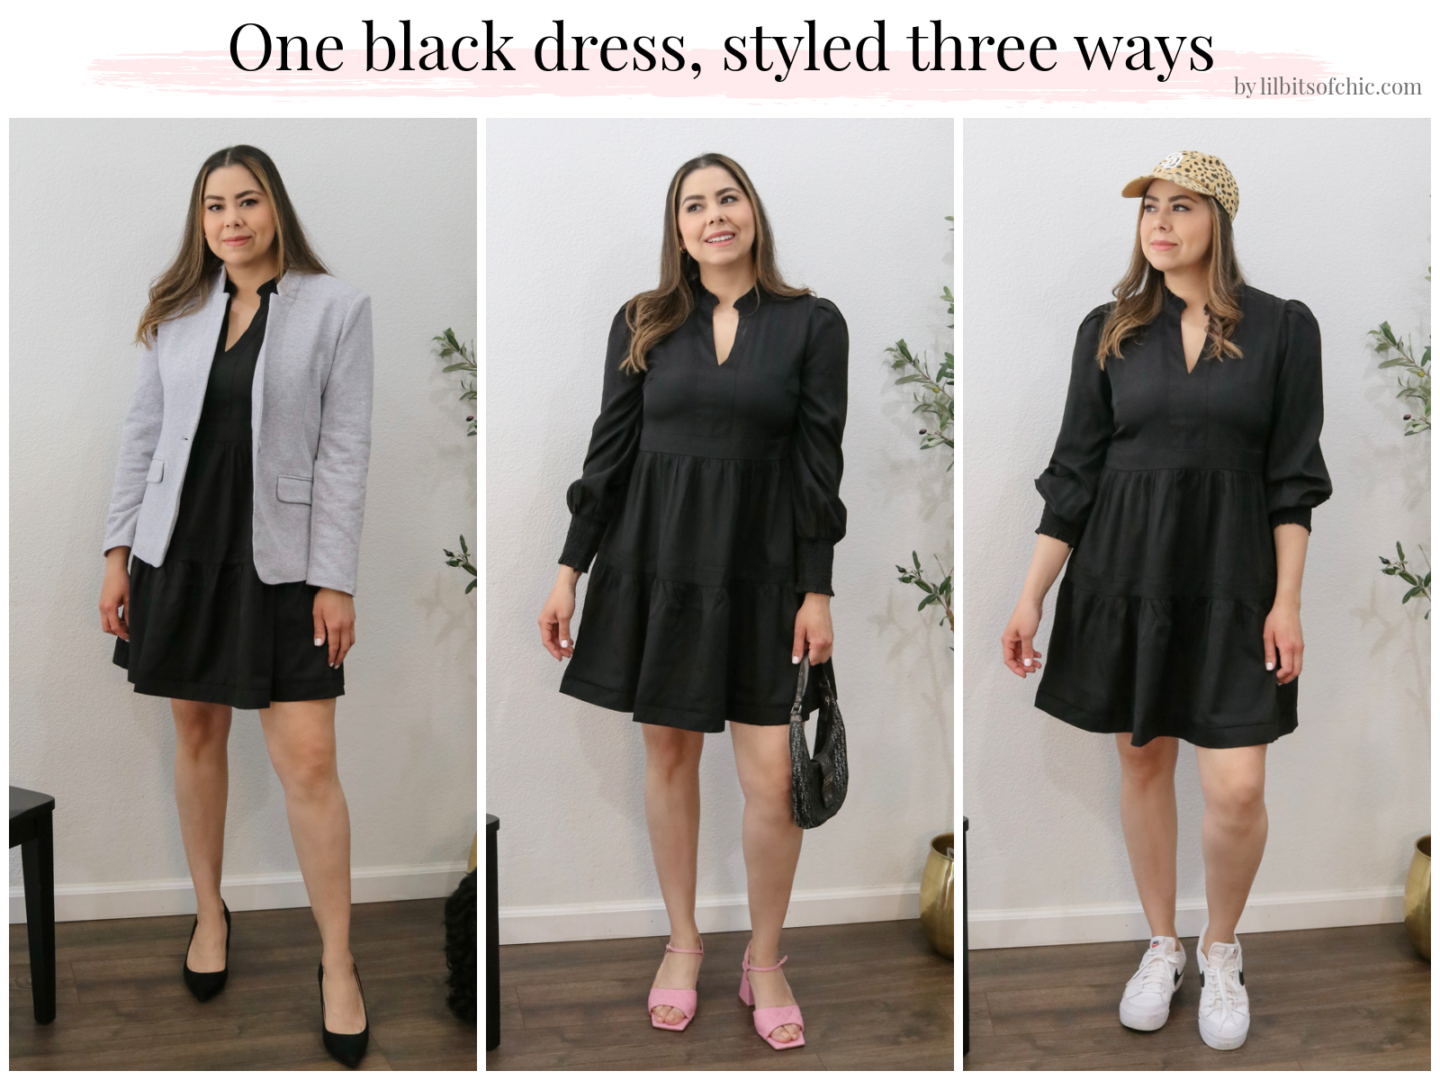 One black day dress styled three ways, how to restyle a little black dress, Gibsonlook dress styled for different occasions